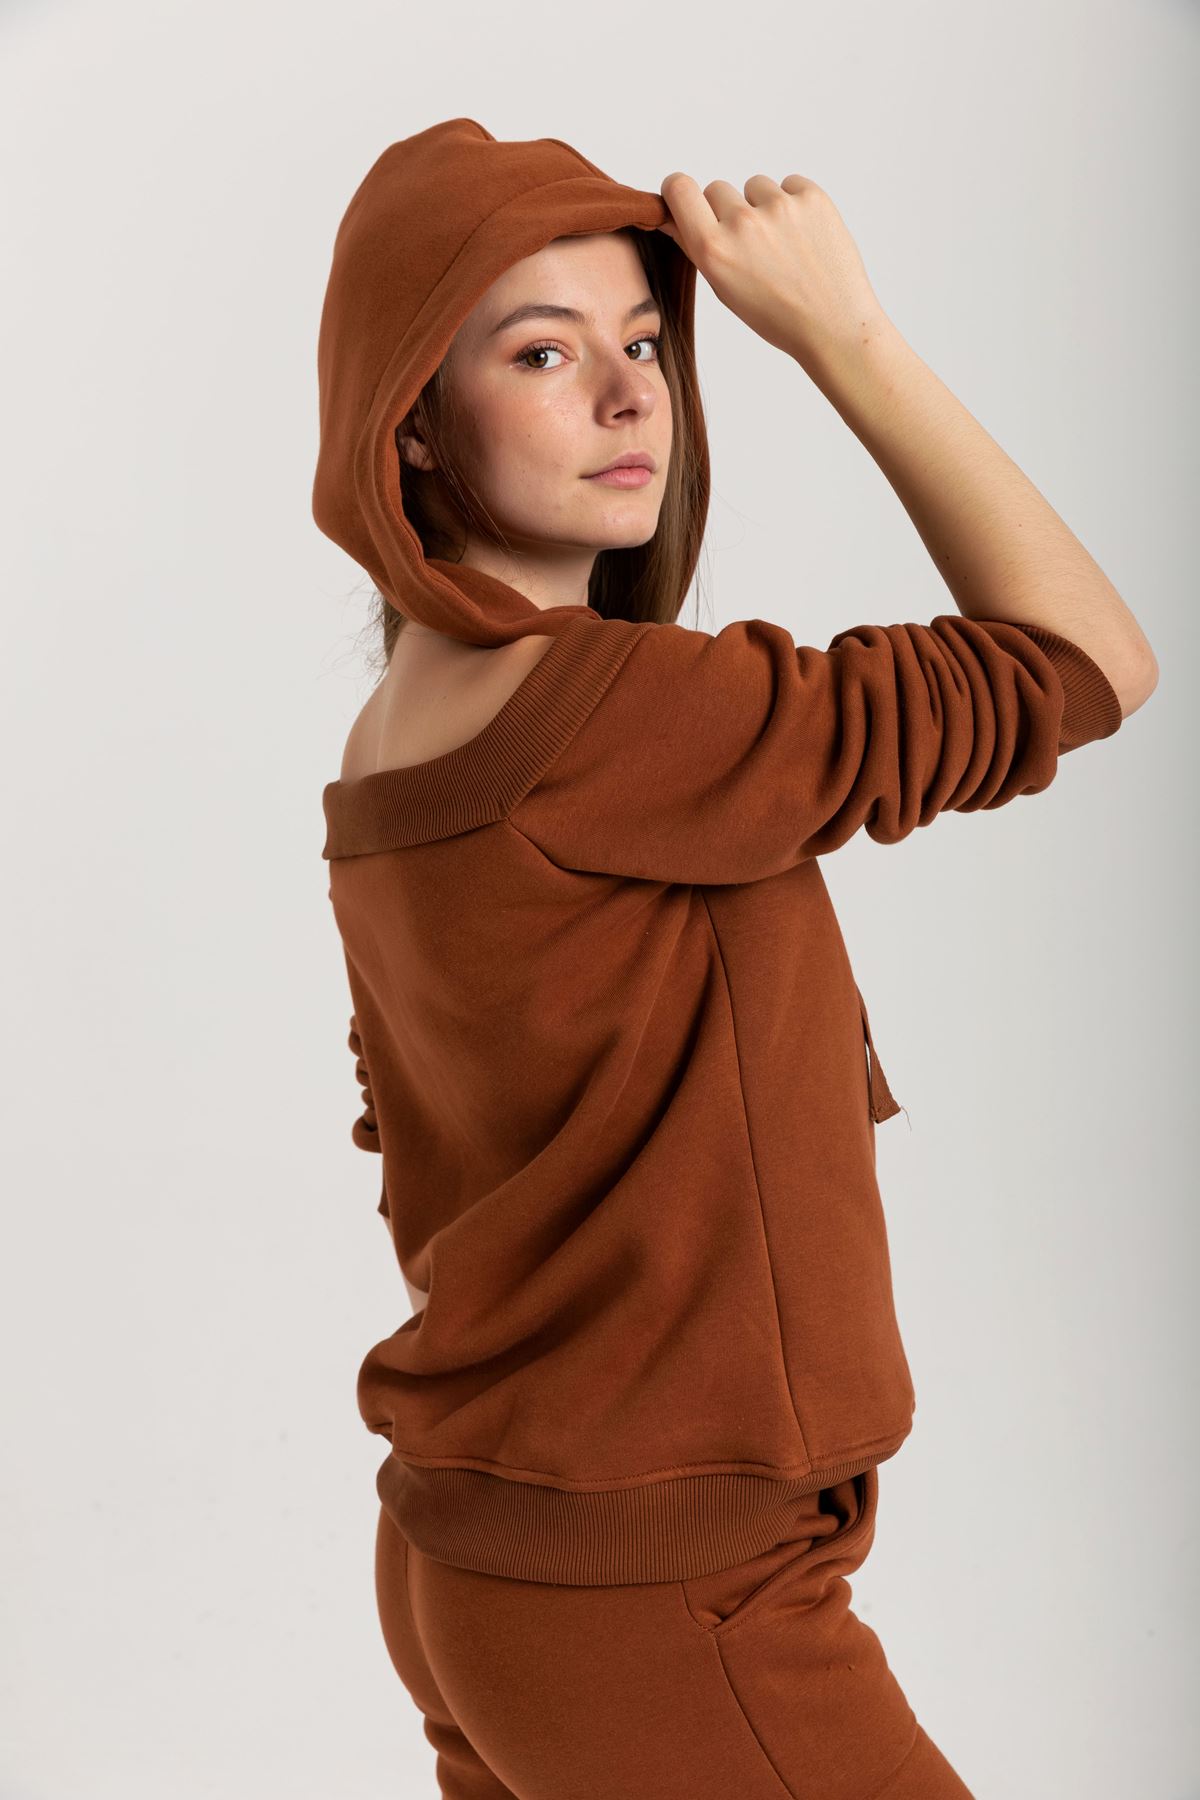 Third Knit With Wool İnside Fabric Hooded Hip Height Shoulder Detailed Women Sweatshirt - Brown